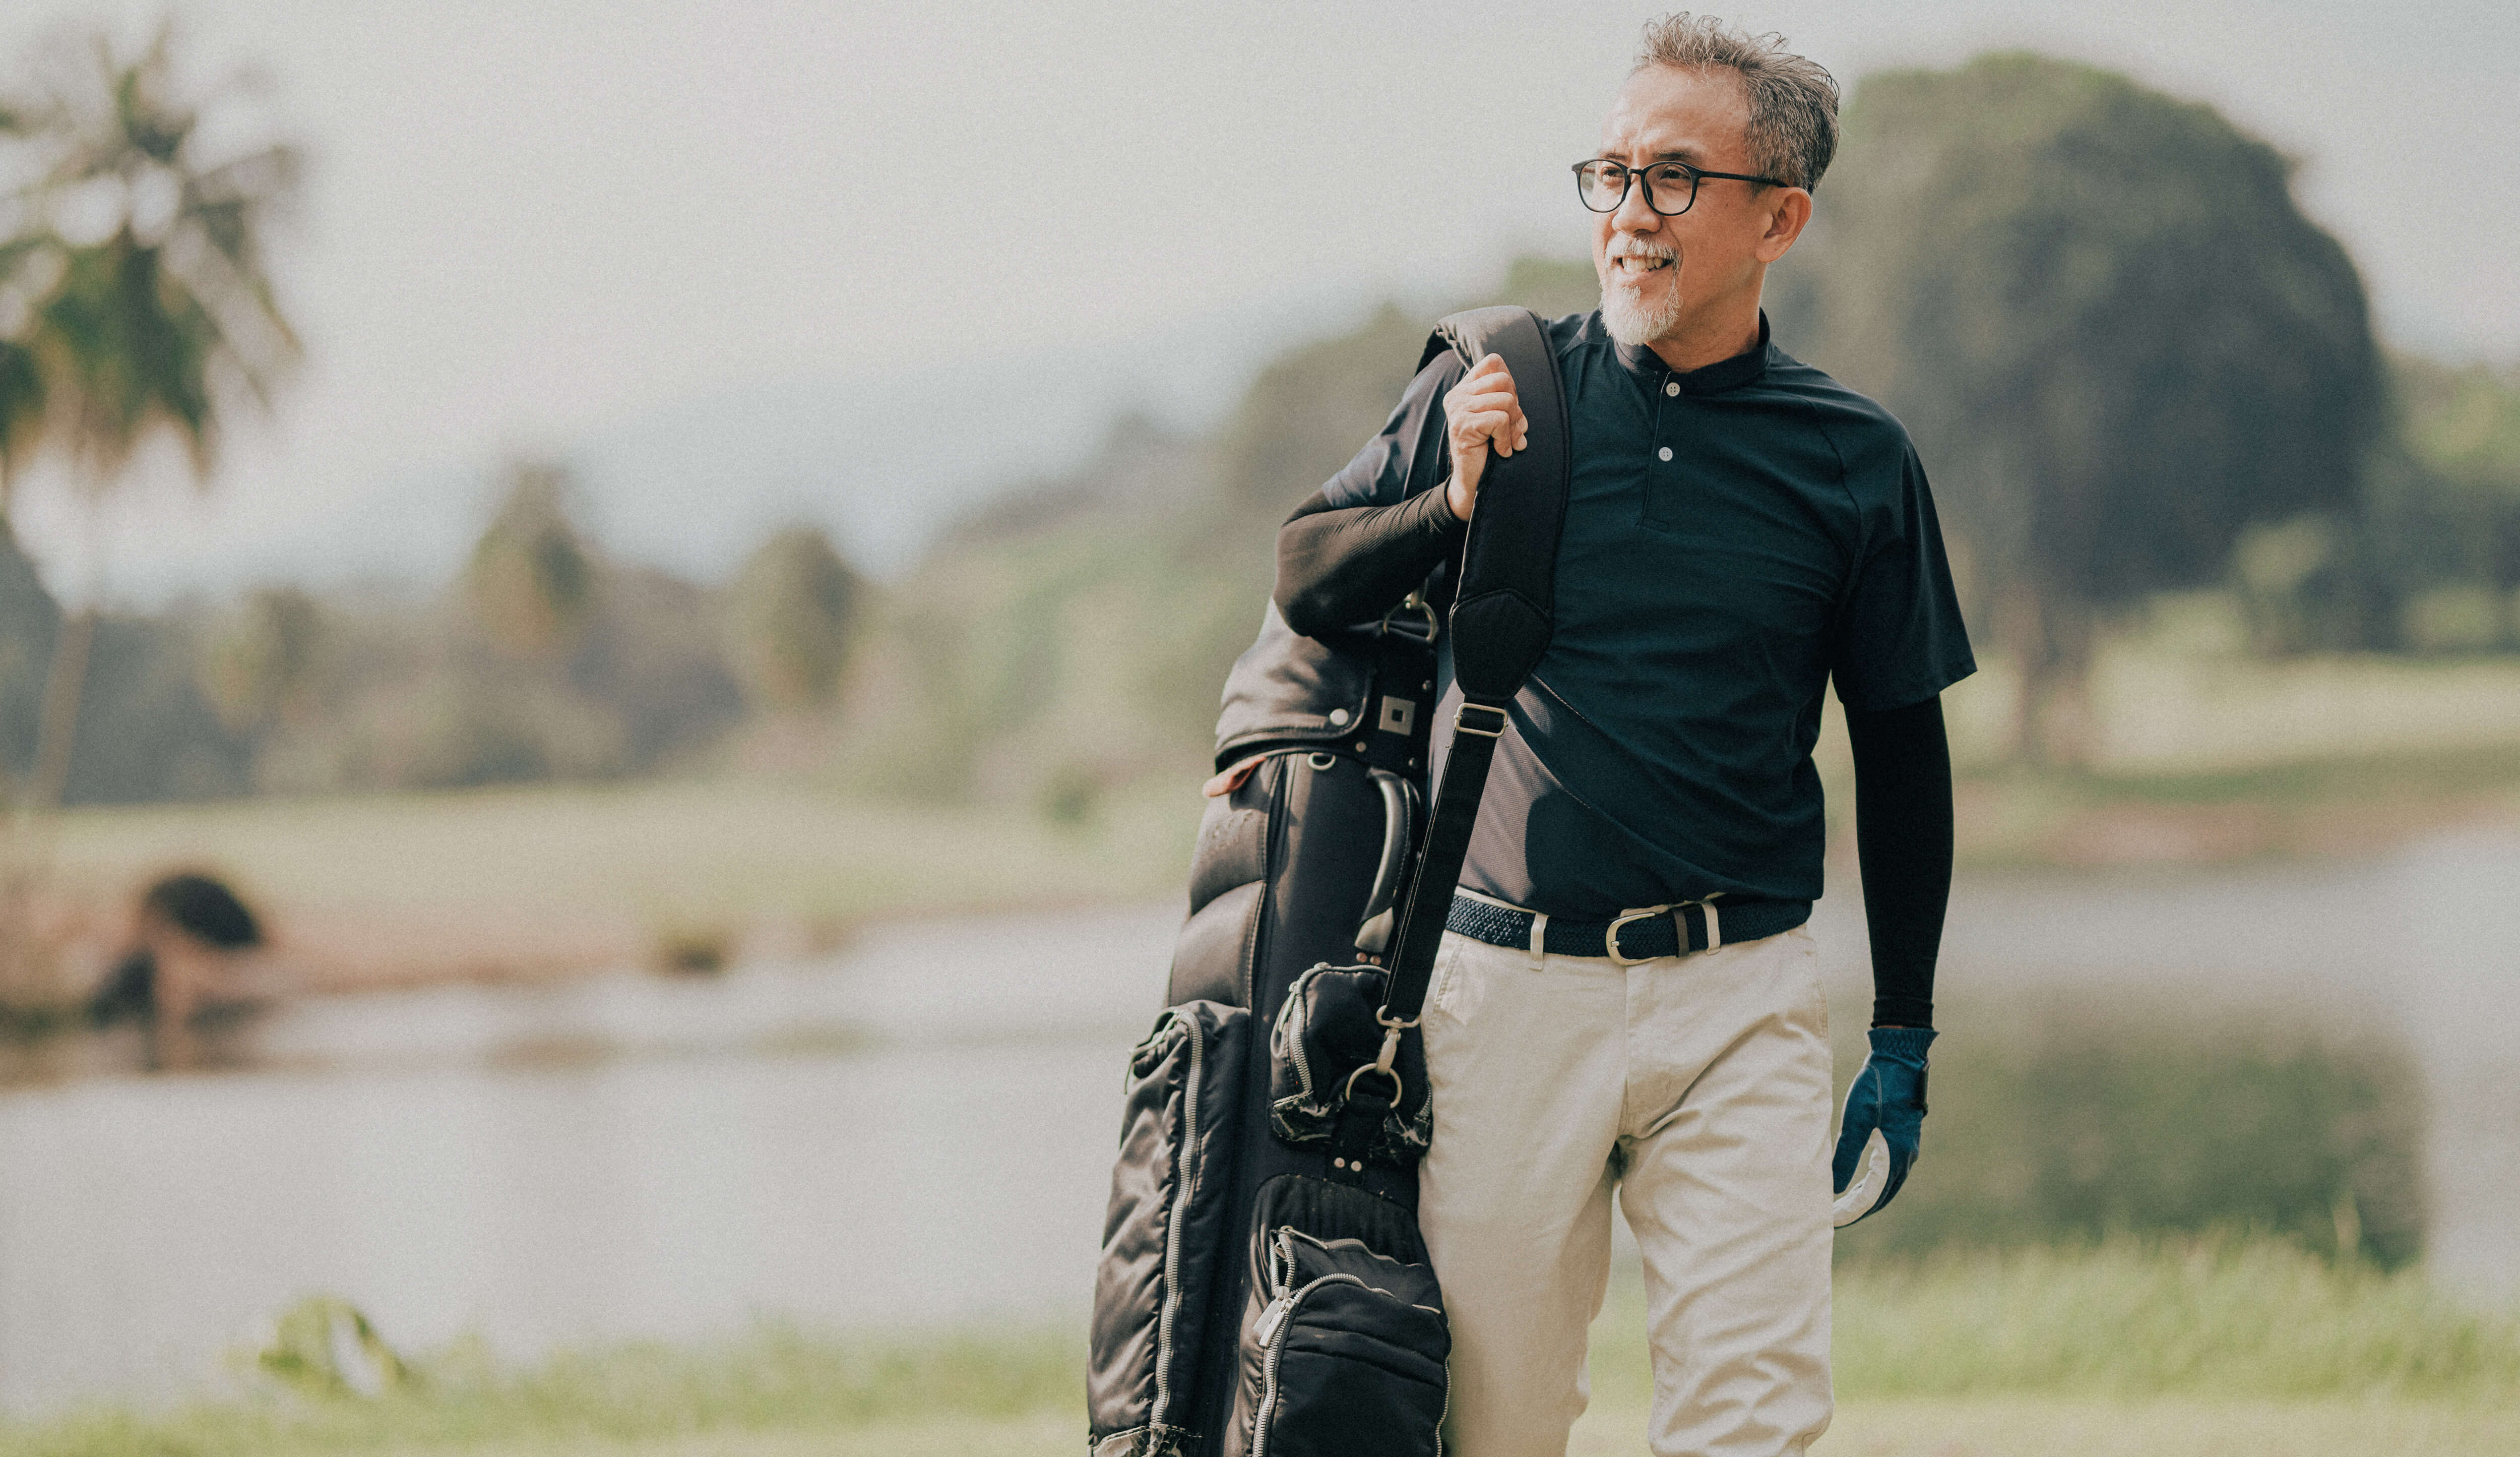 Man enjoying a game of golf, confident that his investments are positioned smartly.